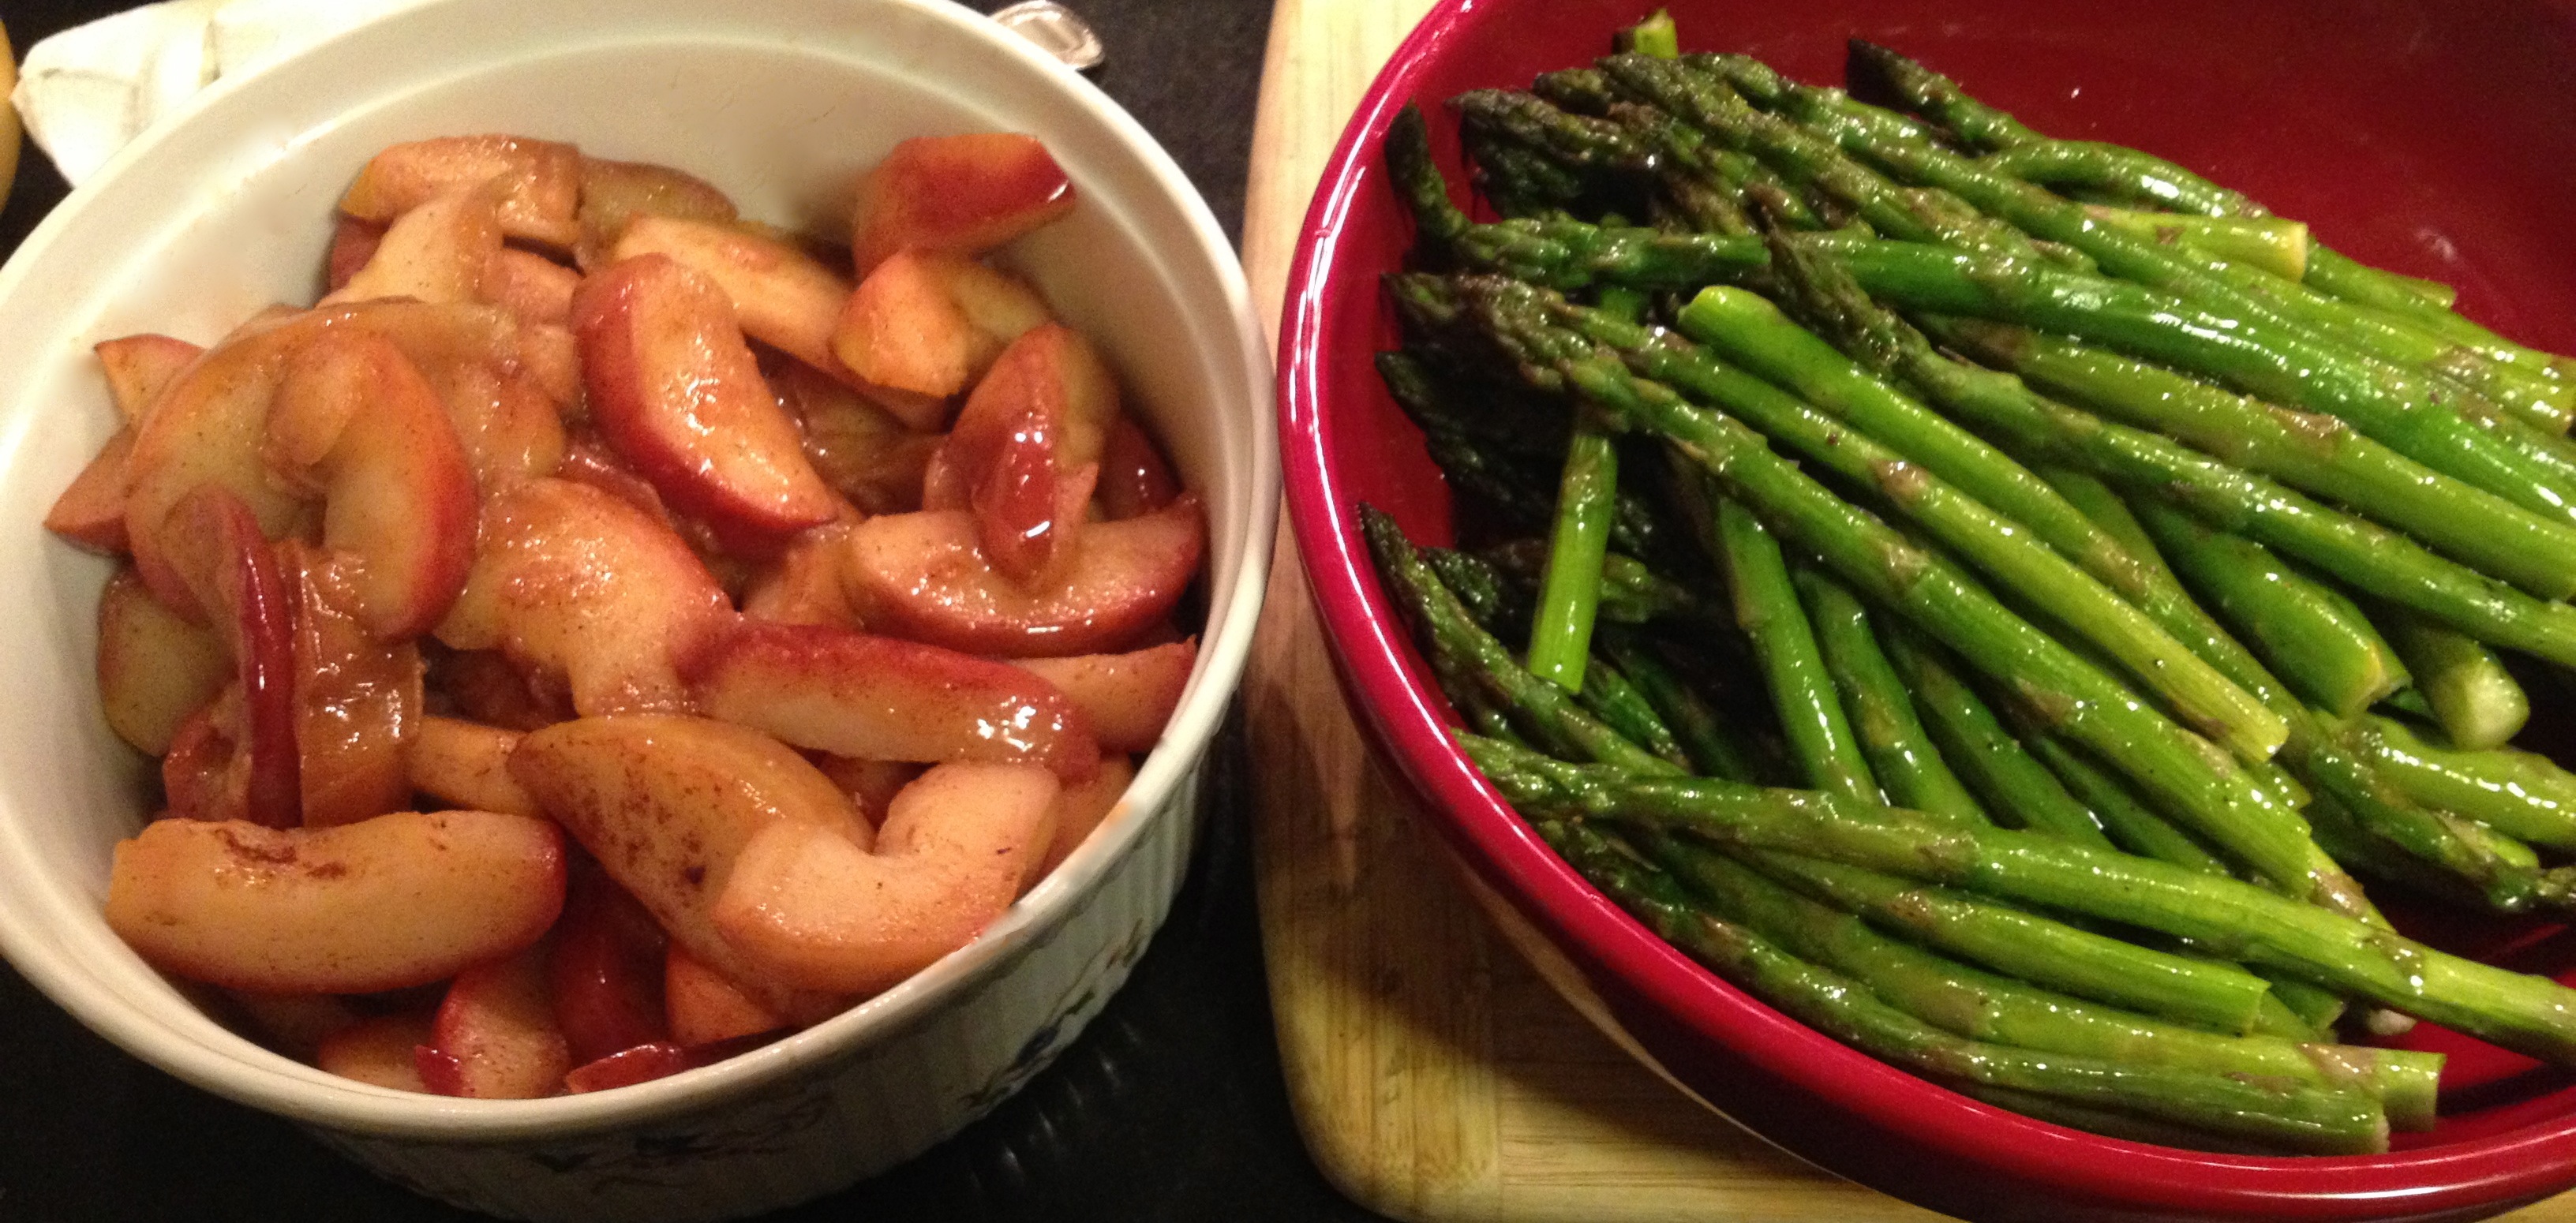 Sauteed apples in butter with cinnamon, nutmeg and lemon; roasted asparagus with olive oil and lemon in a red holiday bowl.